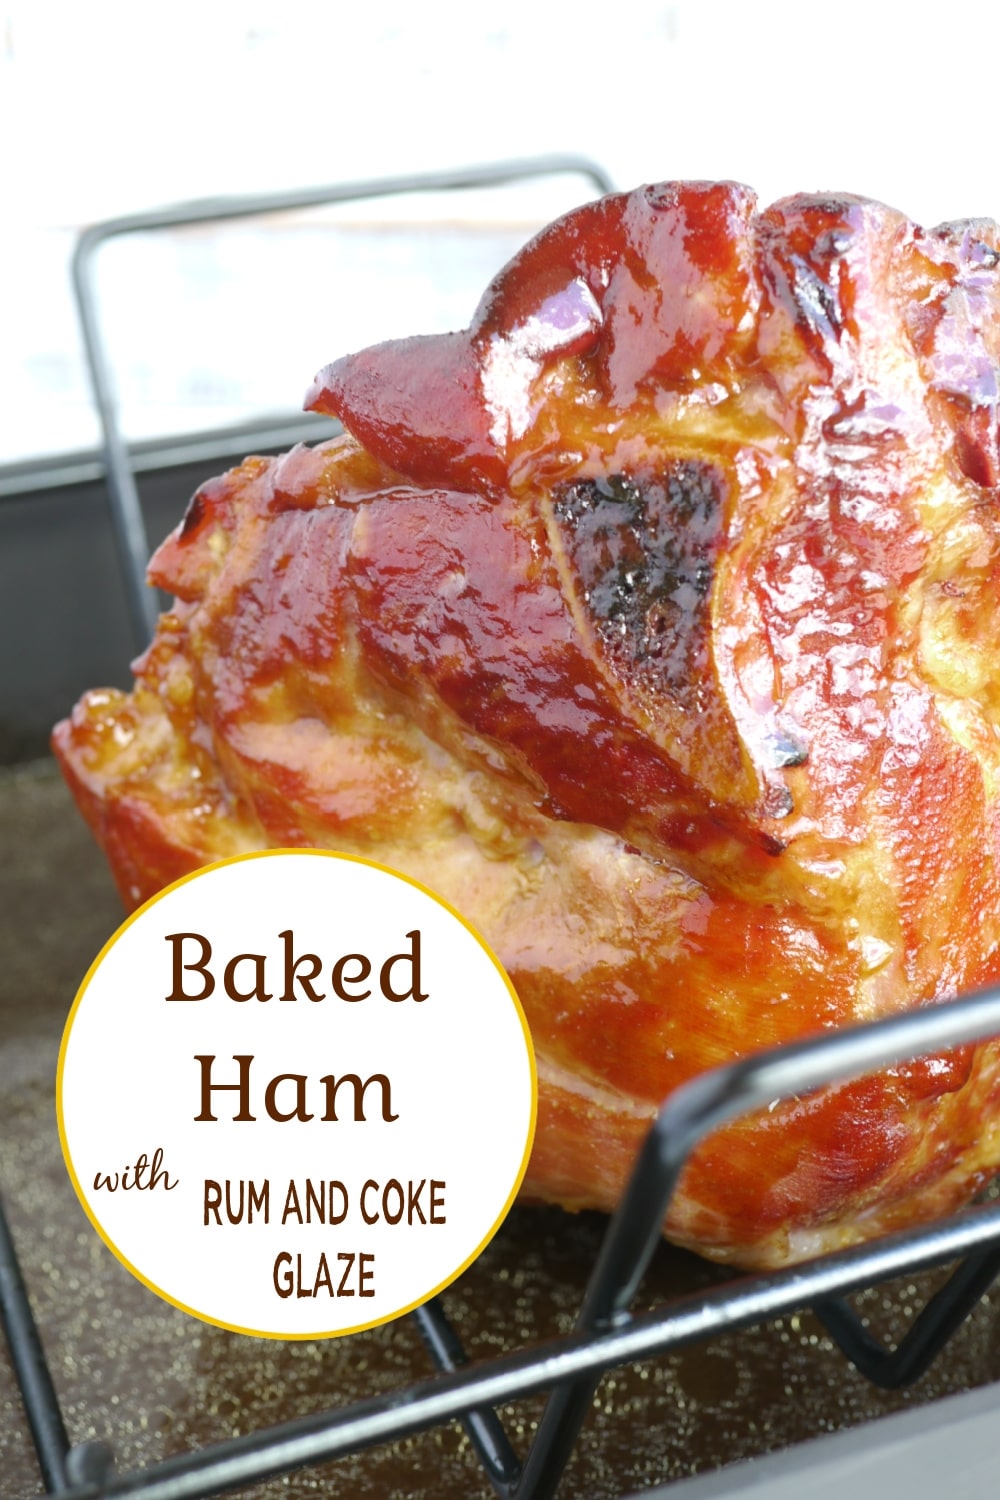 This Baked Ham with Rum and Coke Glaze is a delicious twist on a classic holiday dish. The sweet and savory glaze, made with rum and Coke, adds a unique flavor to the juicy, tender ham. via @cmpollak1